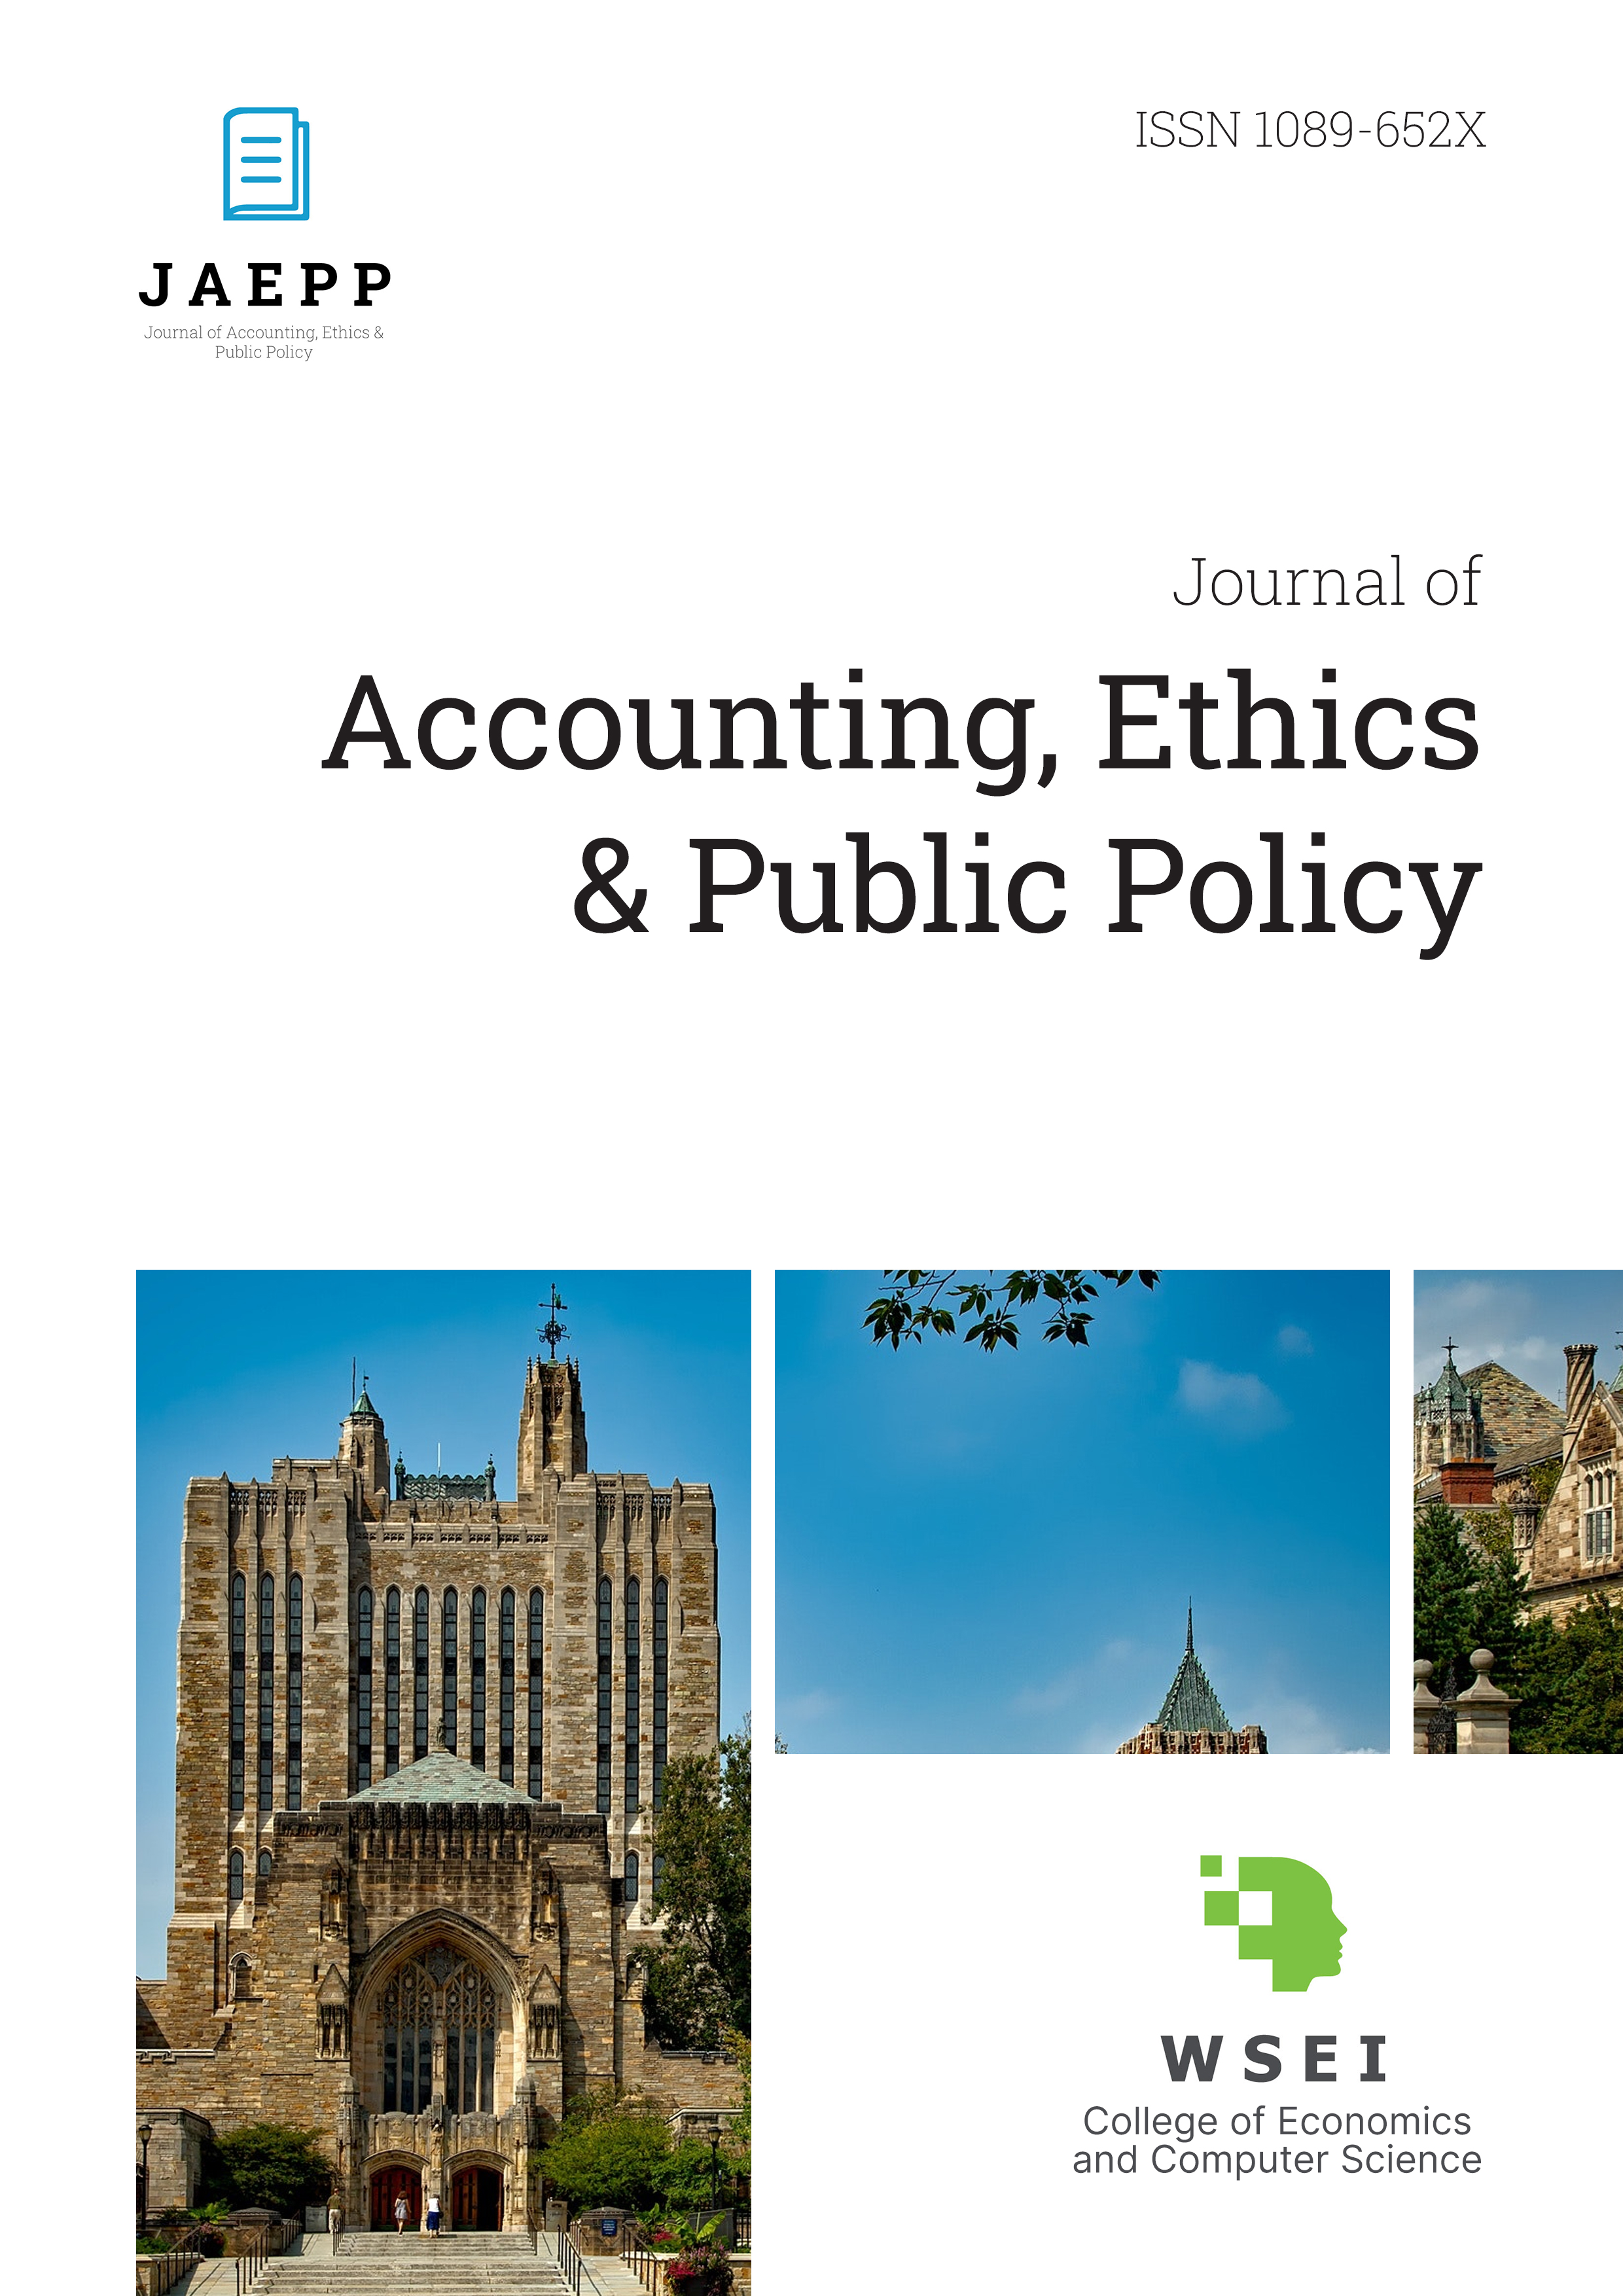 					View Vol. 21 No. 1 (2020): Journal of Accounting, Ethics & Public Policy, JAEPP
				